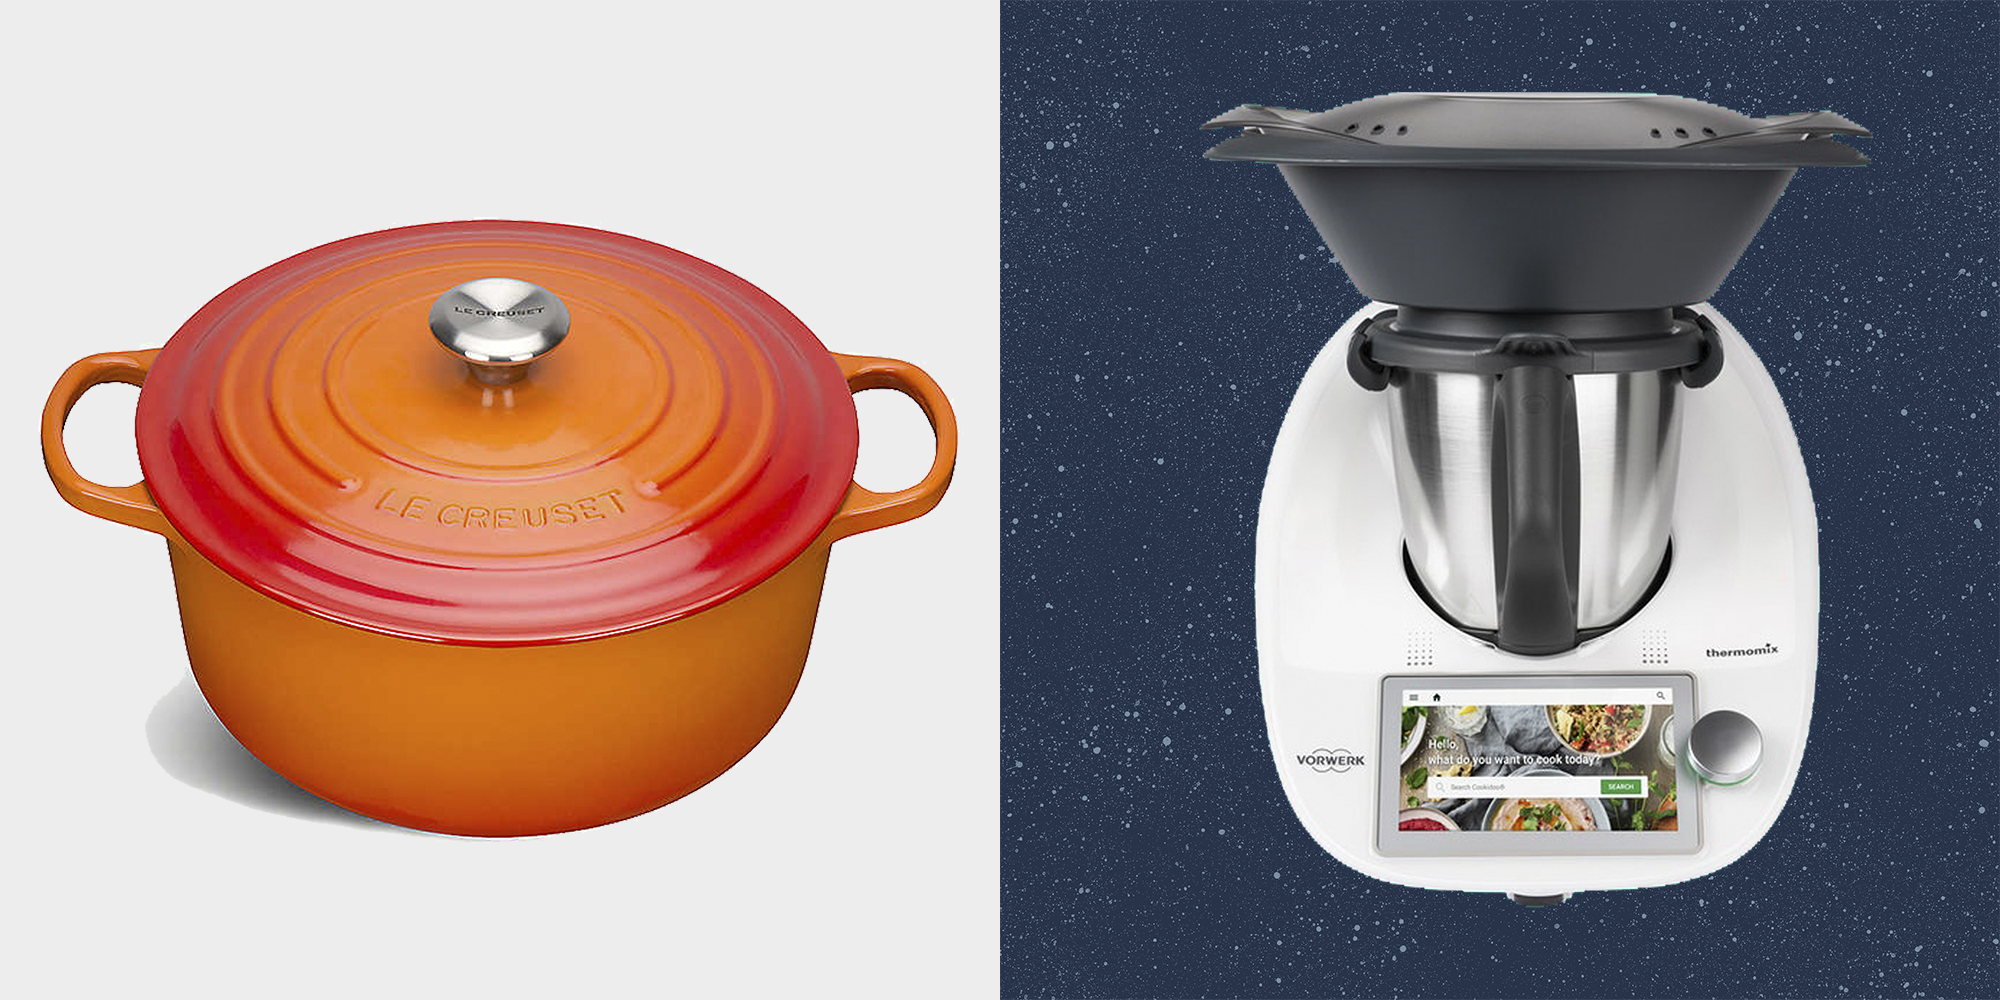 The Best Kitchen Equipment According To Top Chefs